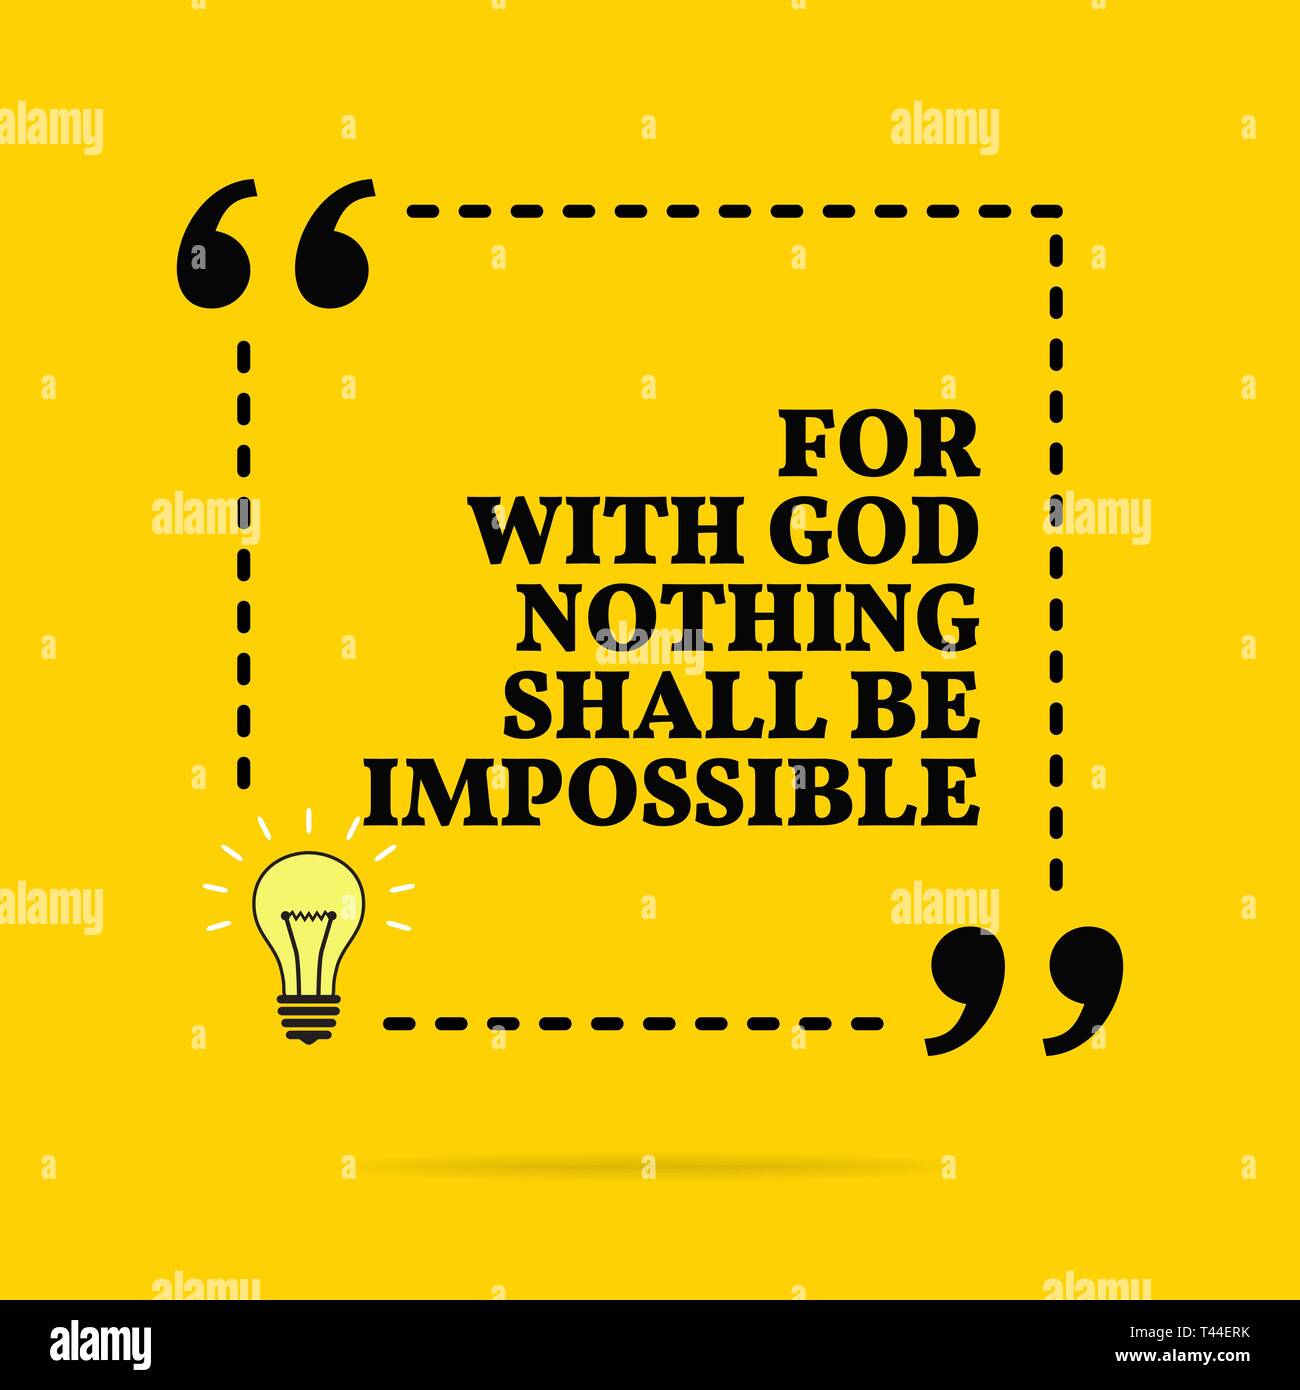 Inspirational motivational quote. For with God nothing shall be impossible. Black text over yellow background Stock Vector